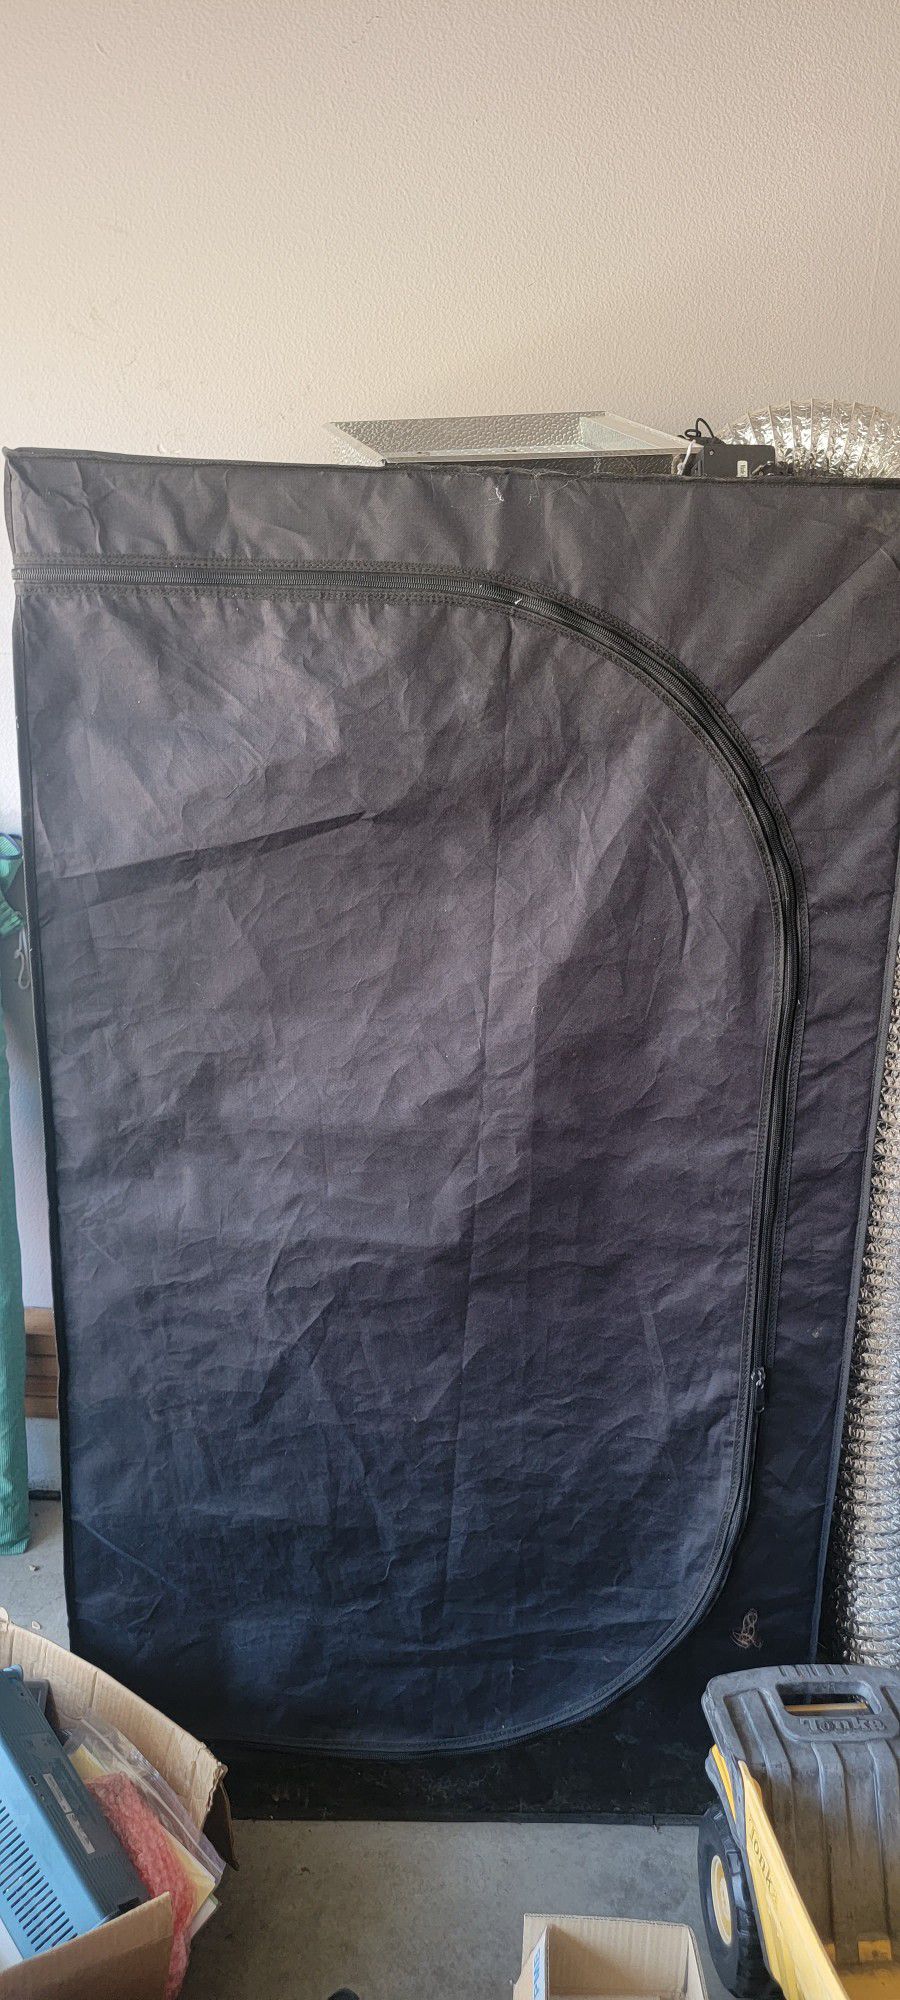 Grow Tent And Accessories 